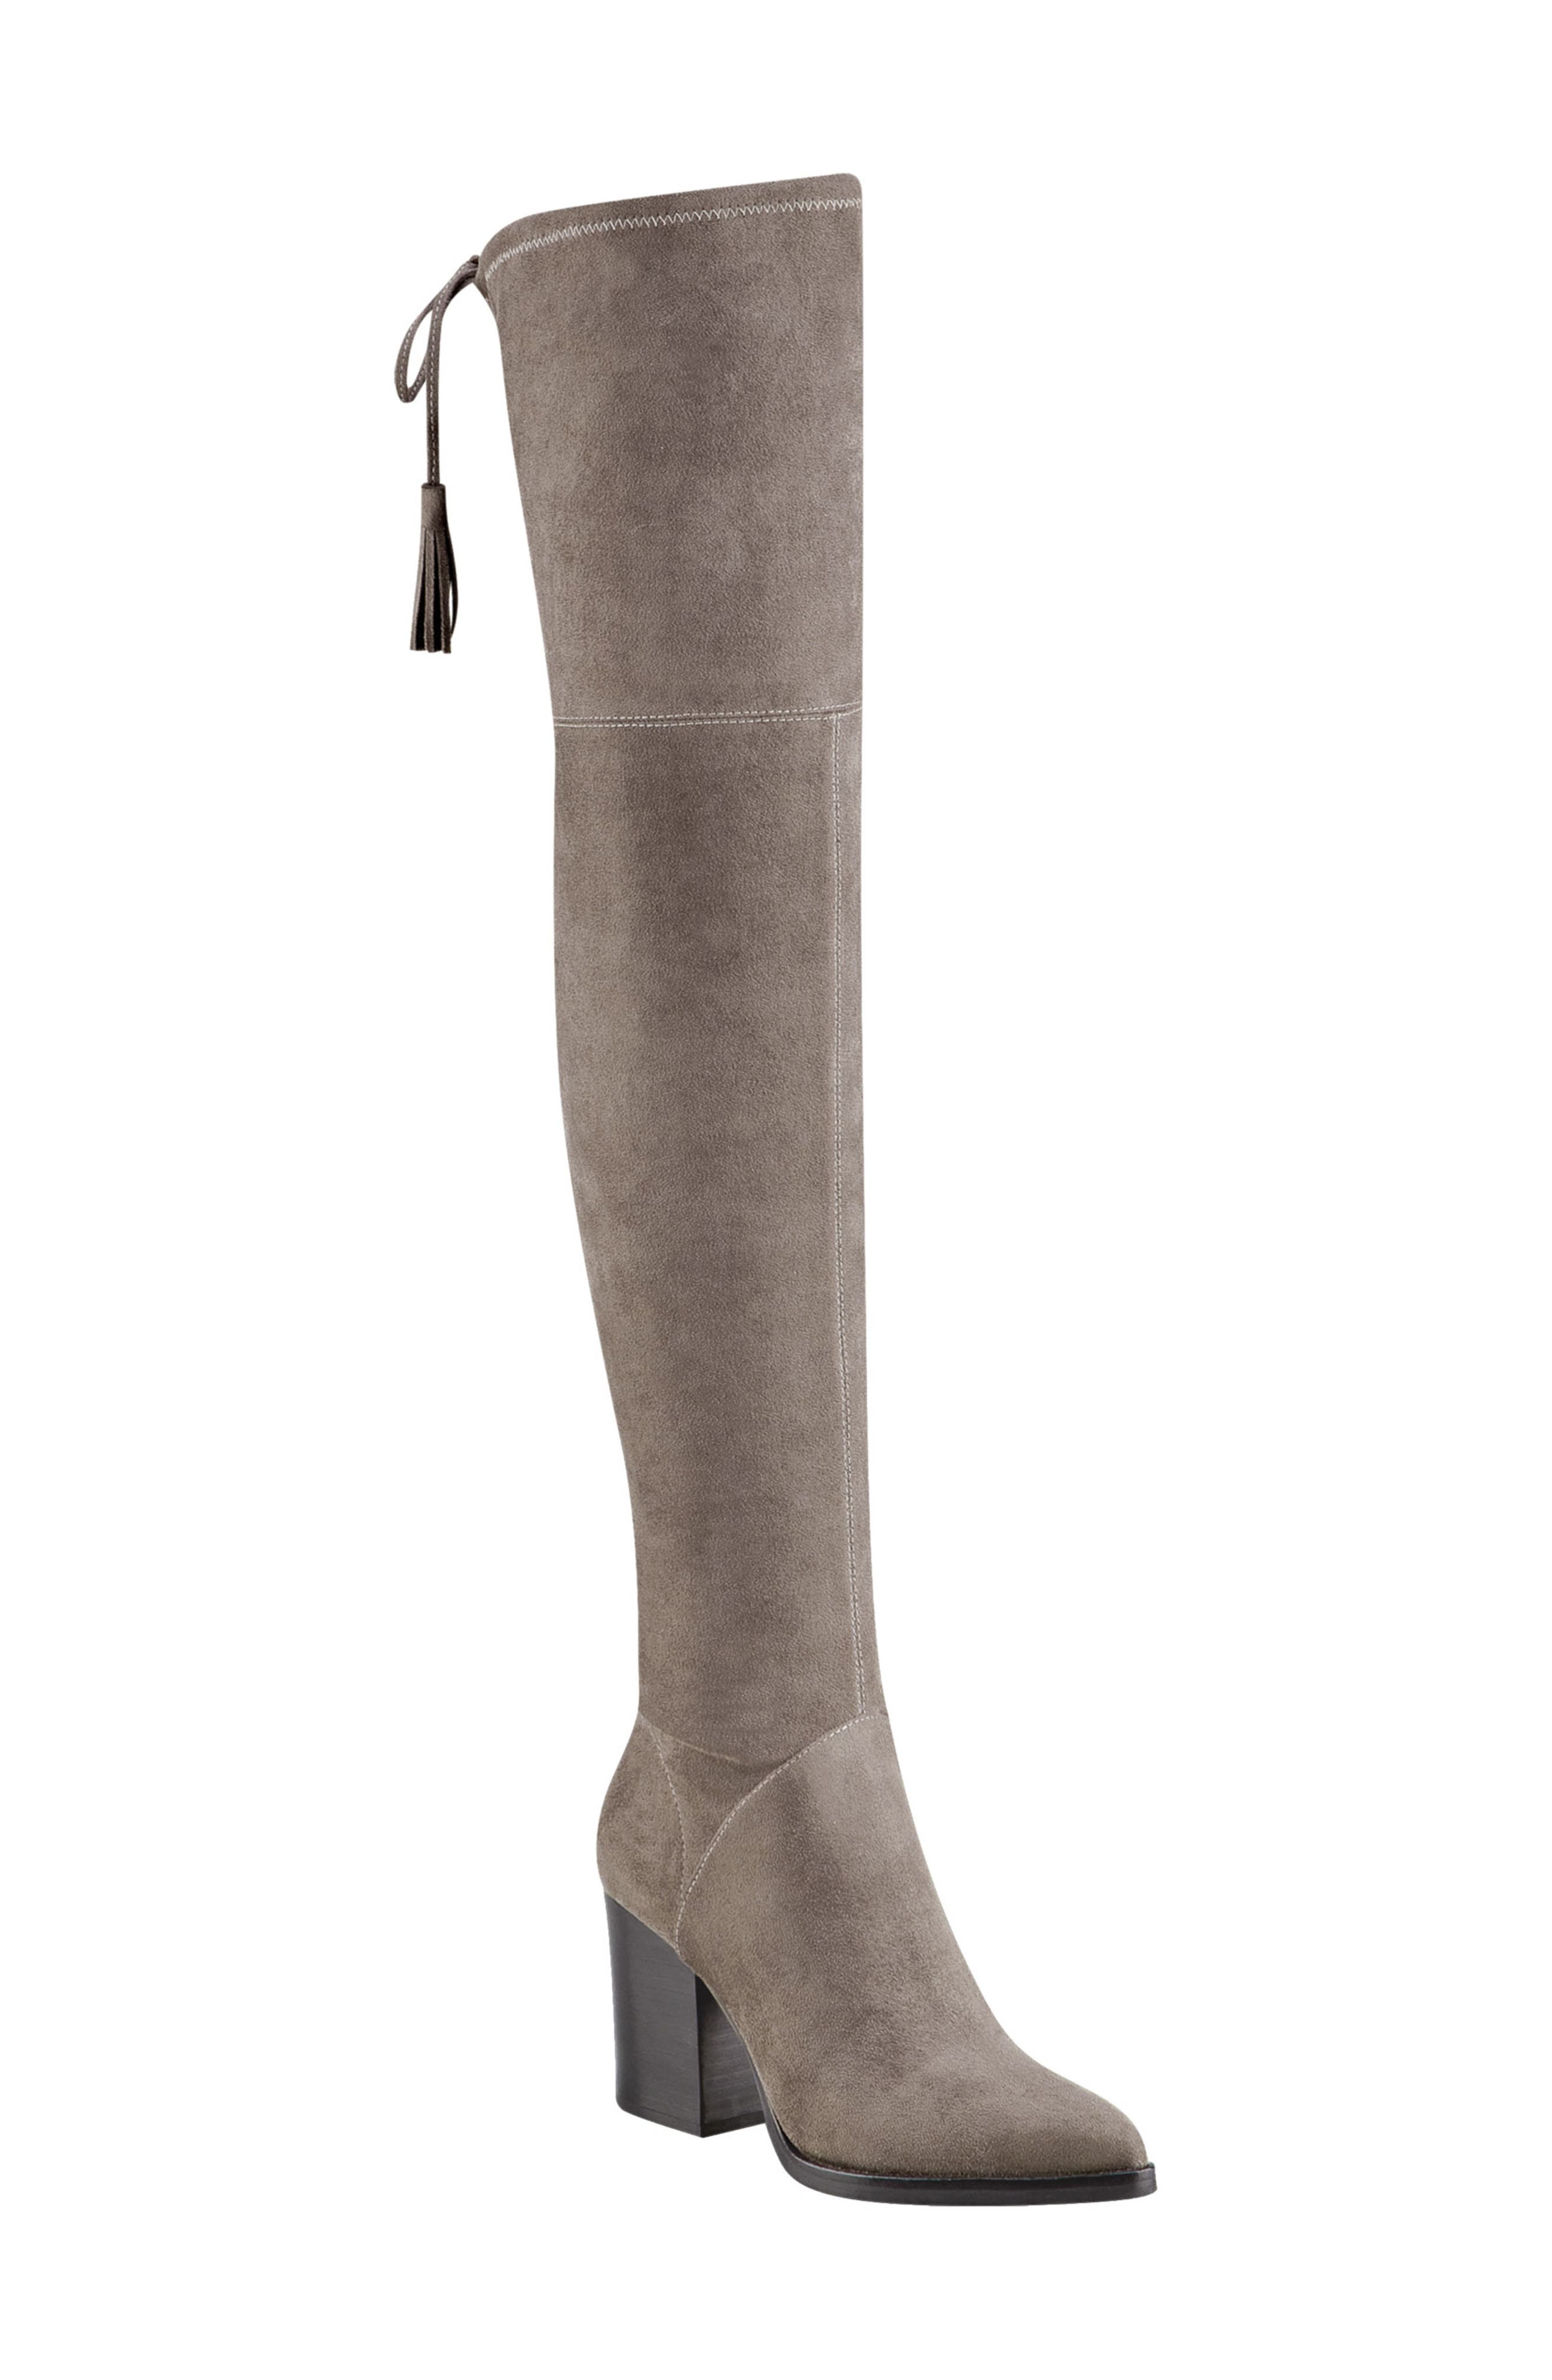 meana over the knee boot enzo angiolini